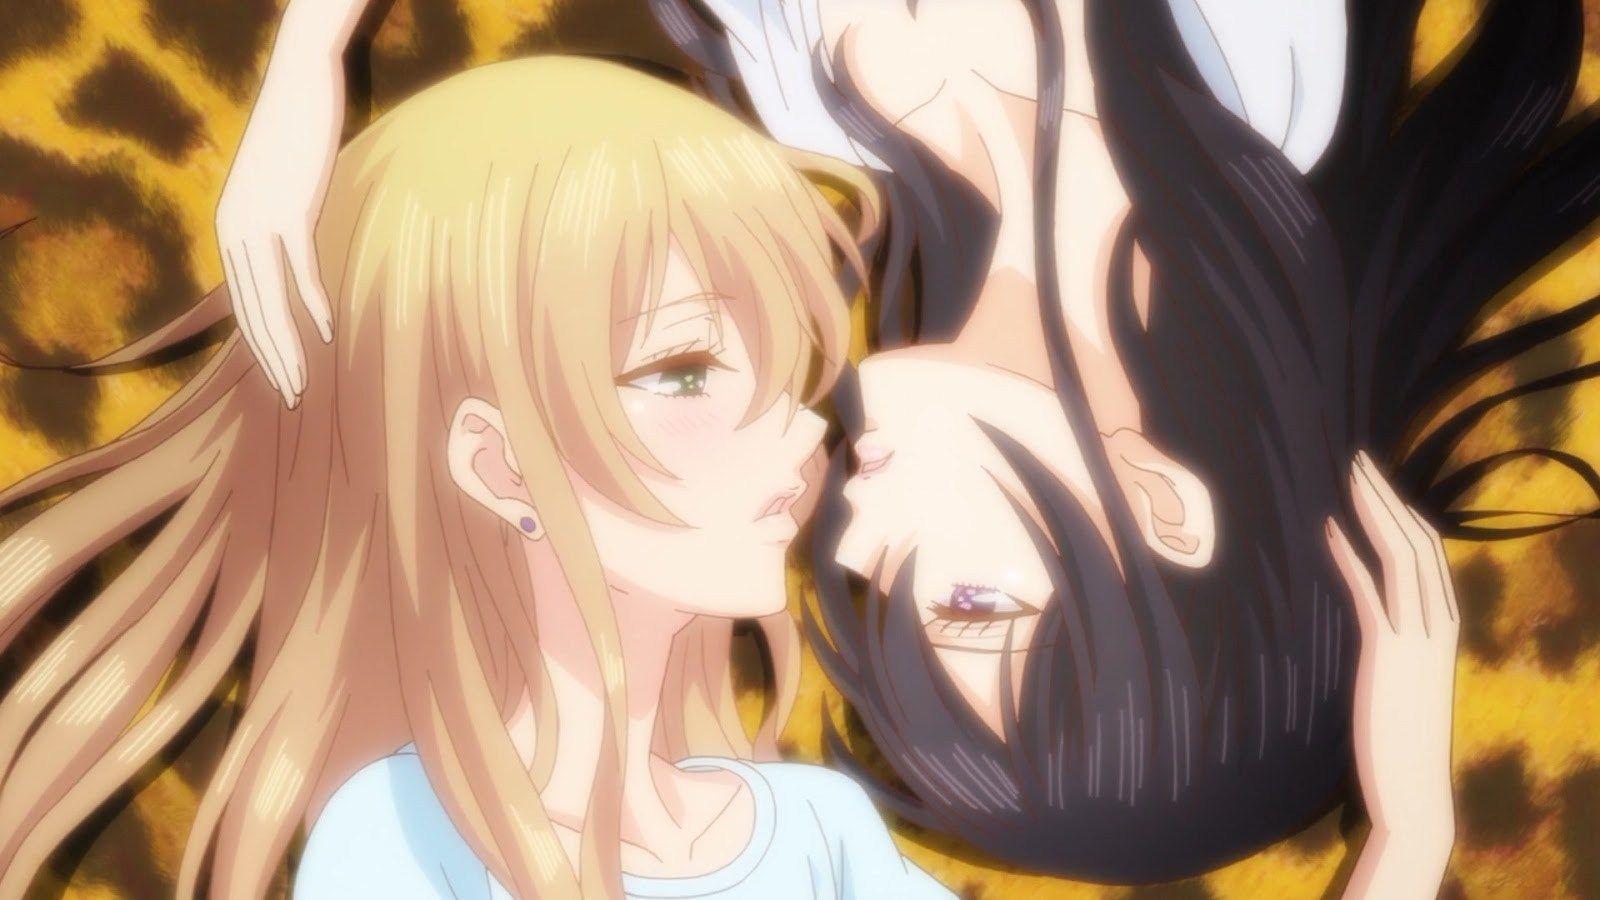 Sweetness and citrus: the mystery of yuri's male audience